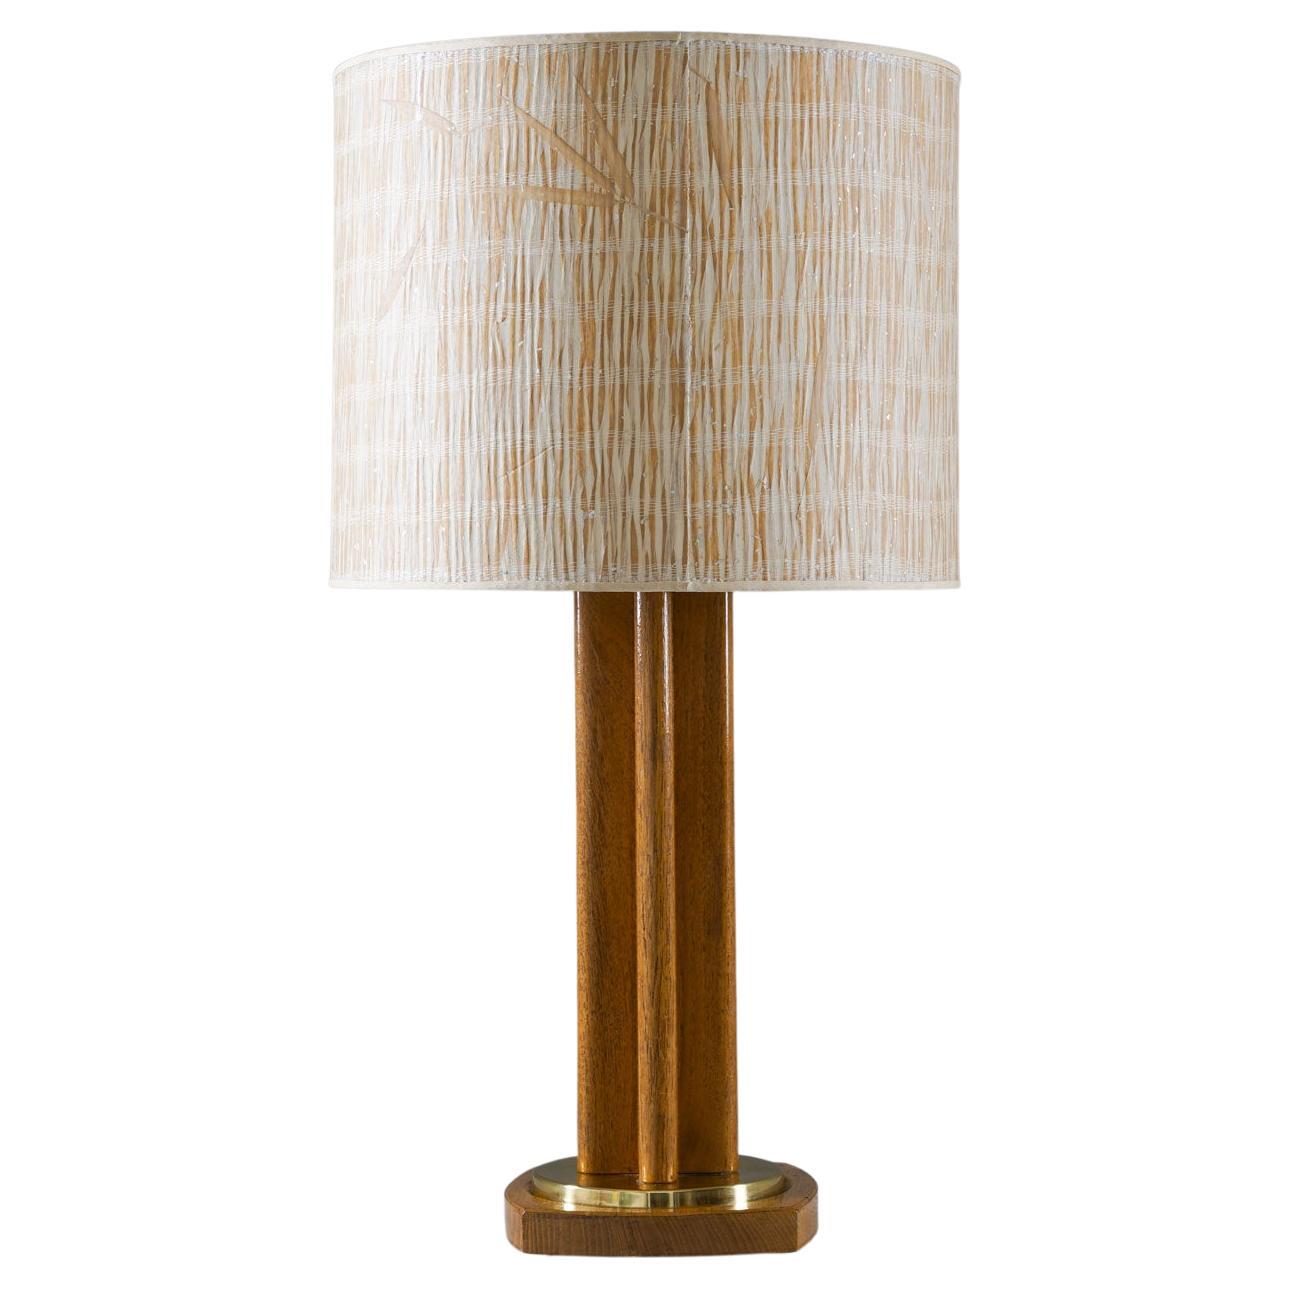 Scandinavian Midcentury Table Lamp in Oak and Brass by MAE, Sweden For Sale